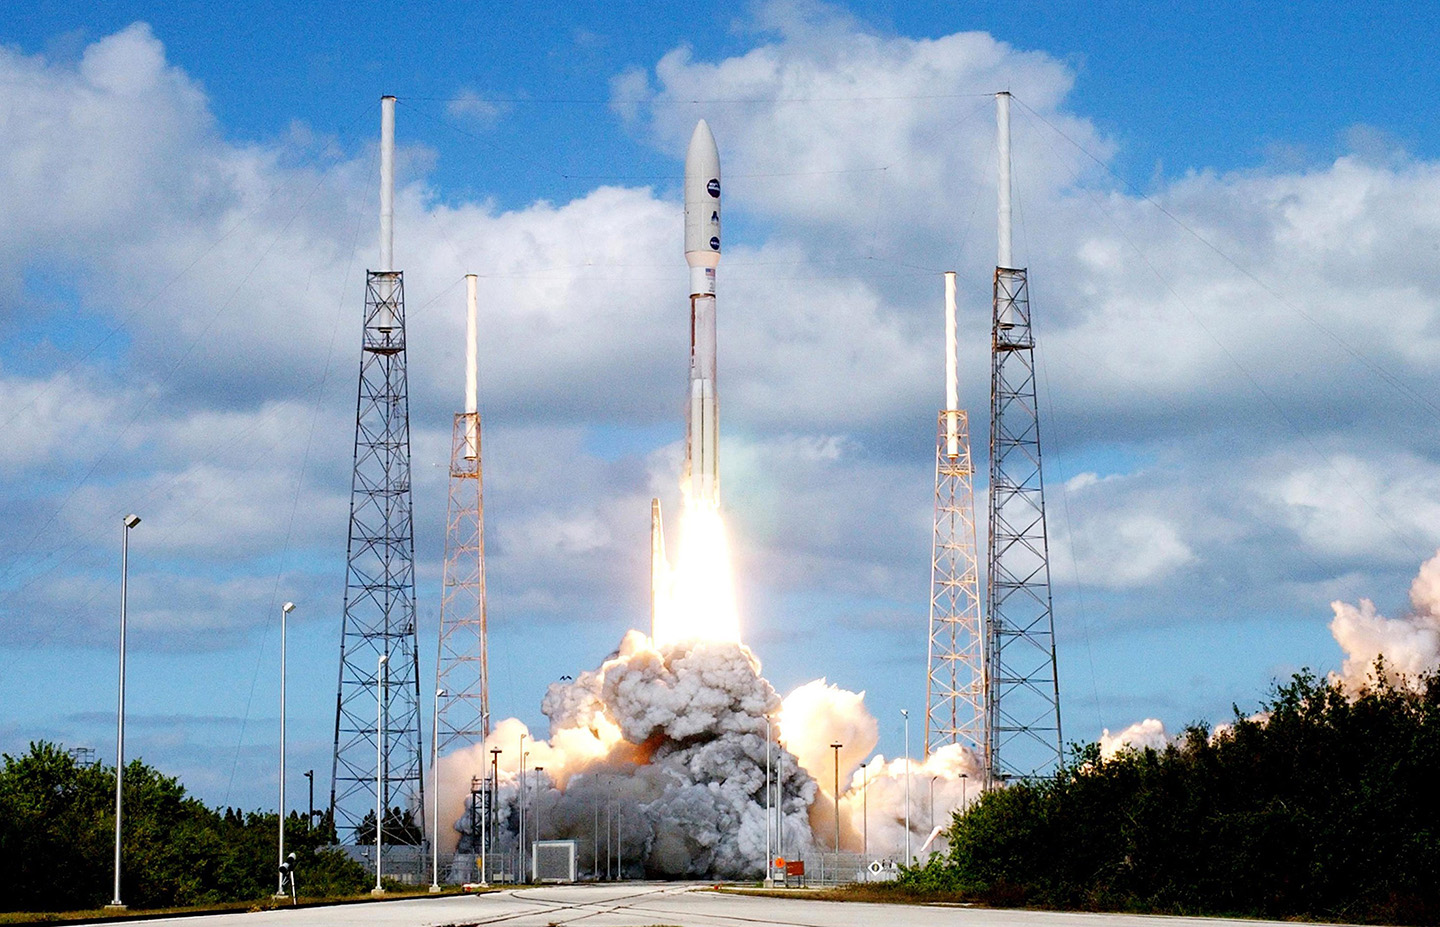 New Horizons spacecraft launches from Cape Canaveral Air Force Station, Florida